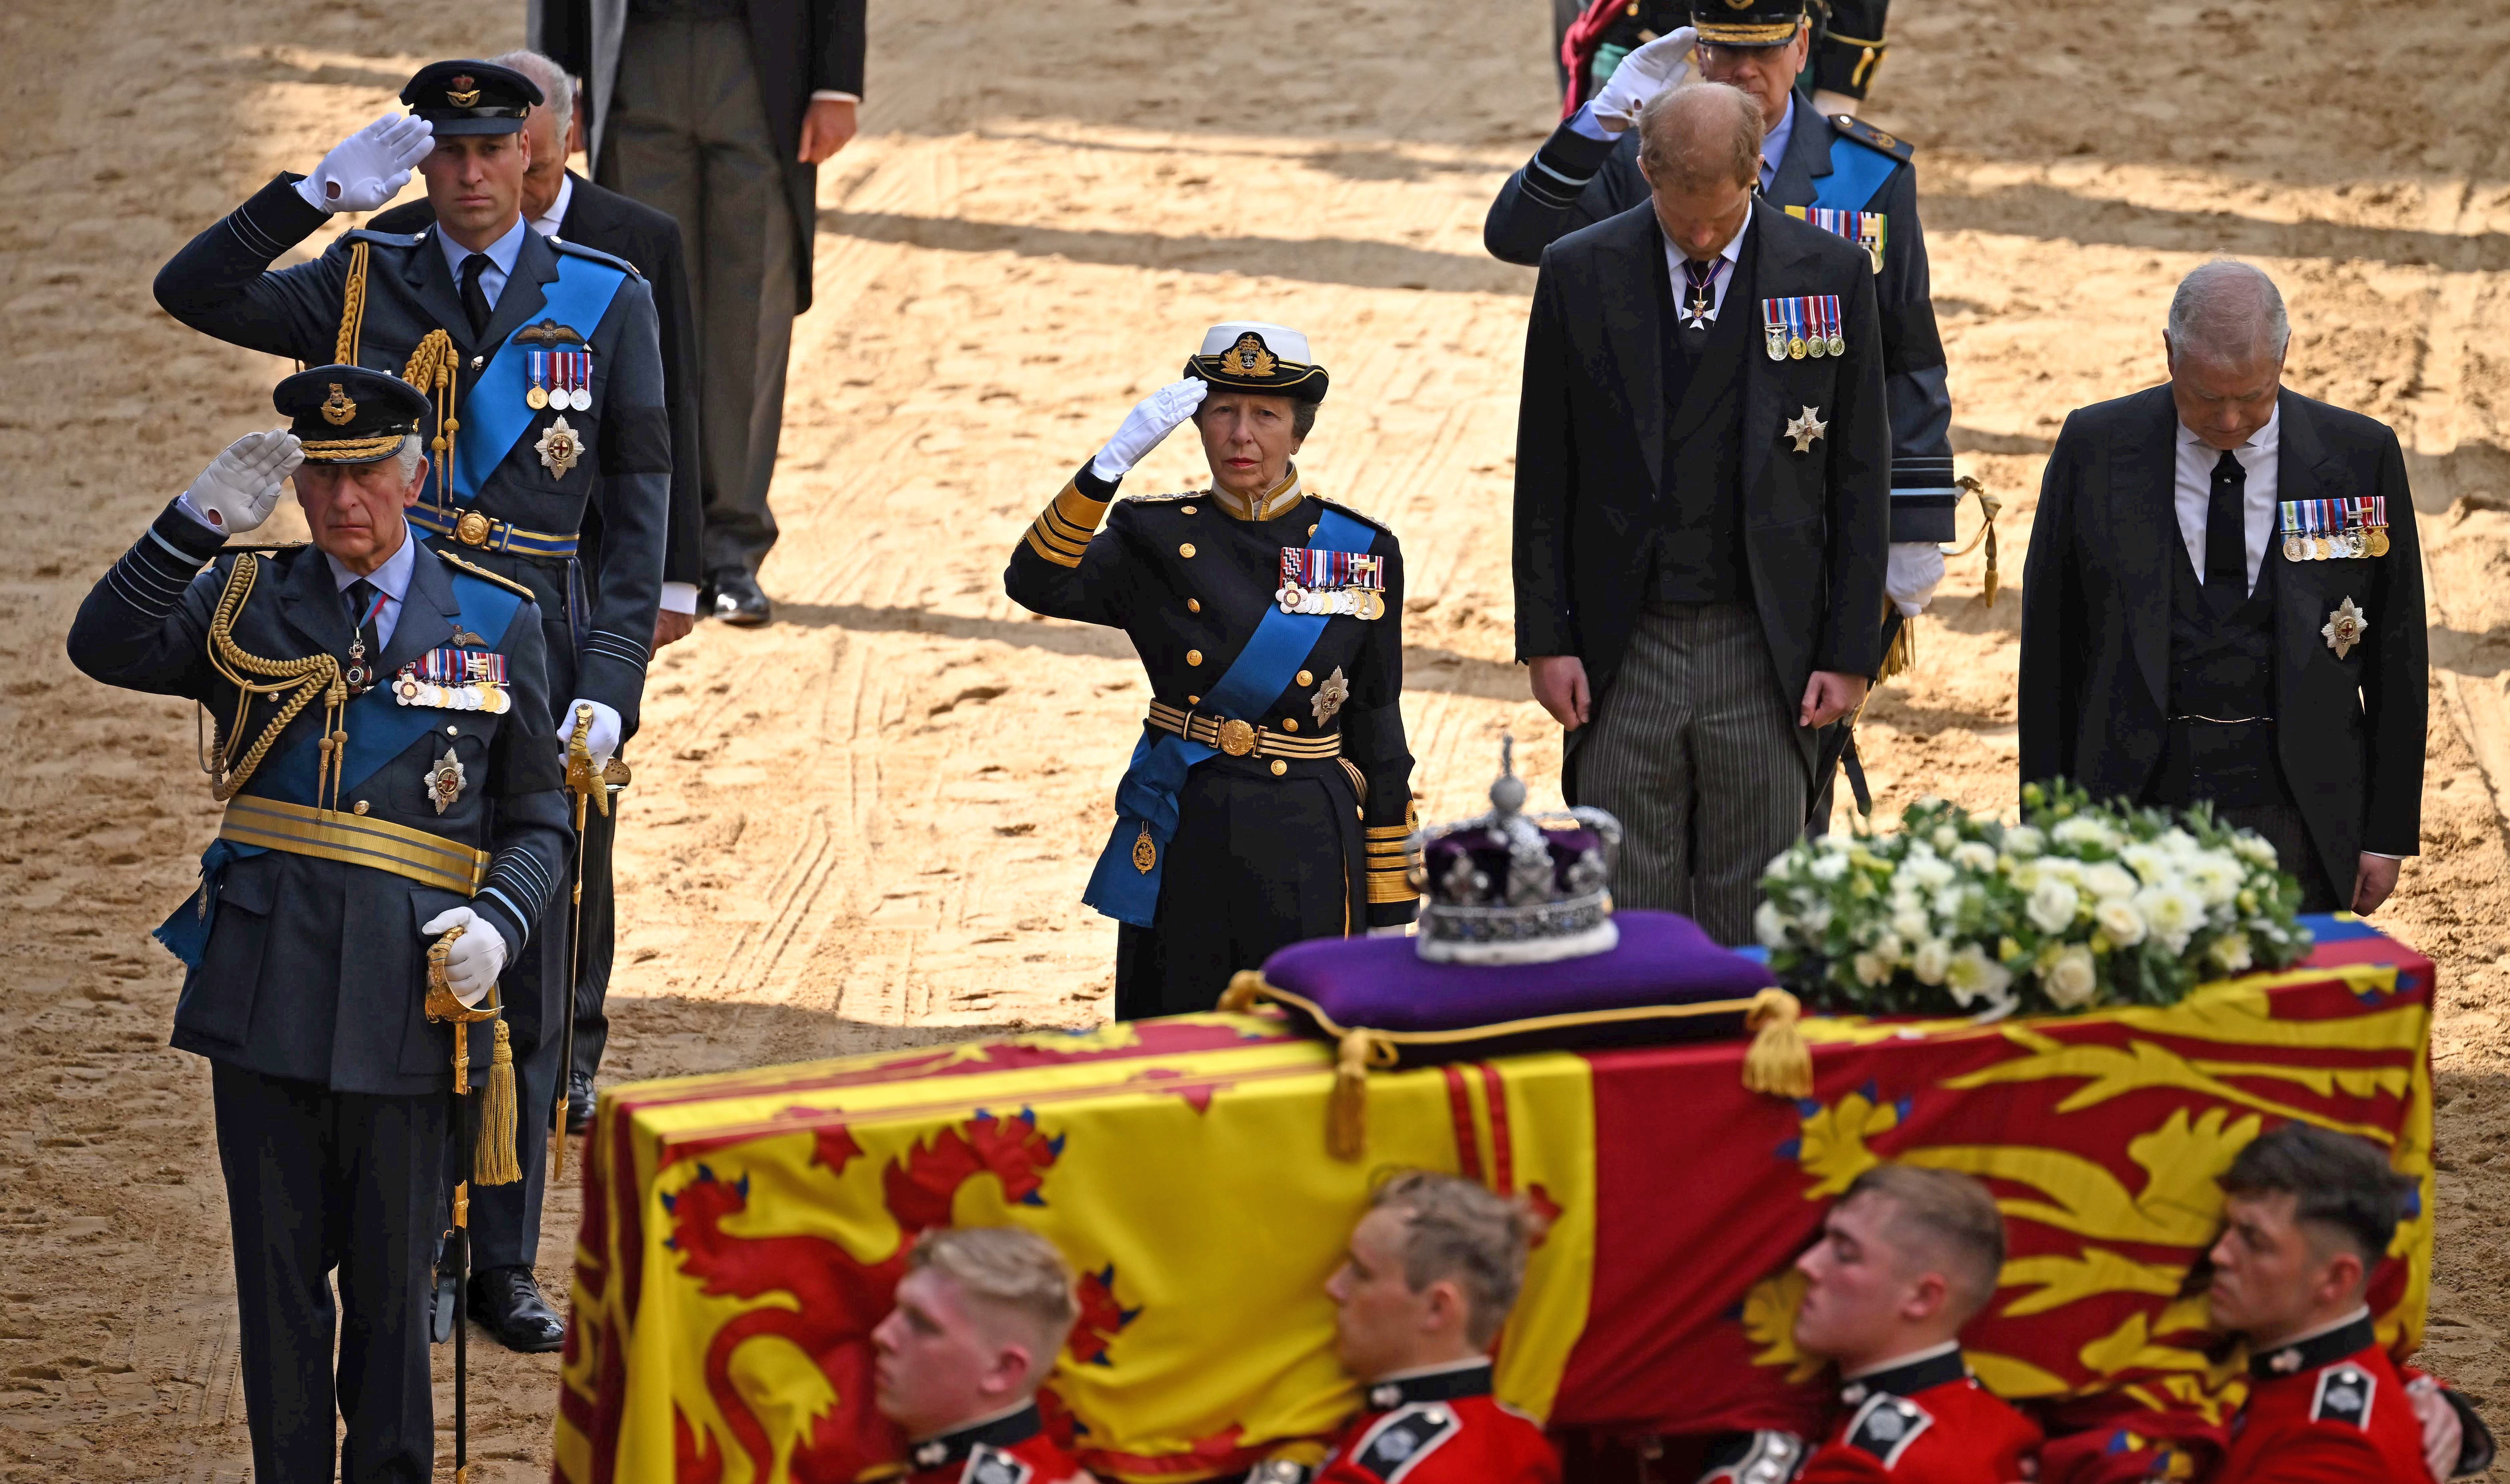 King Charles III, Prince William, Princess Anne, Prince Harry, and Prince Andrew follow the coffin of Queen Elizabeth II, adorned with a Royal Standard and the Imperial State Crown, arrives at the Palace of Westminster on September 14, 2022 in London, United Kingdom | Source: Getty Images